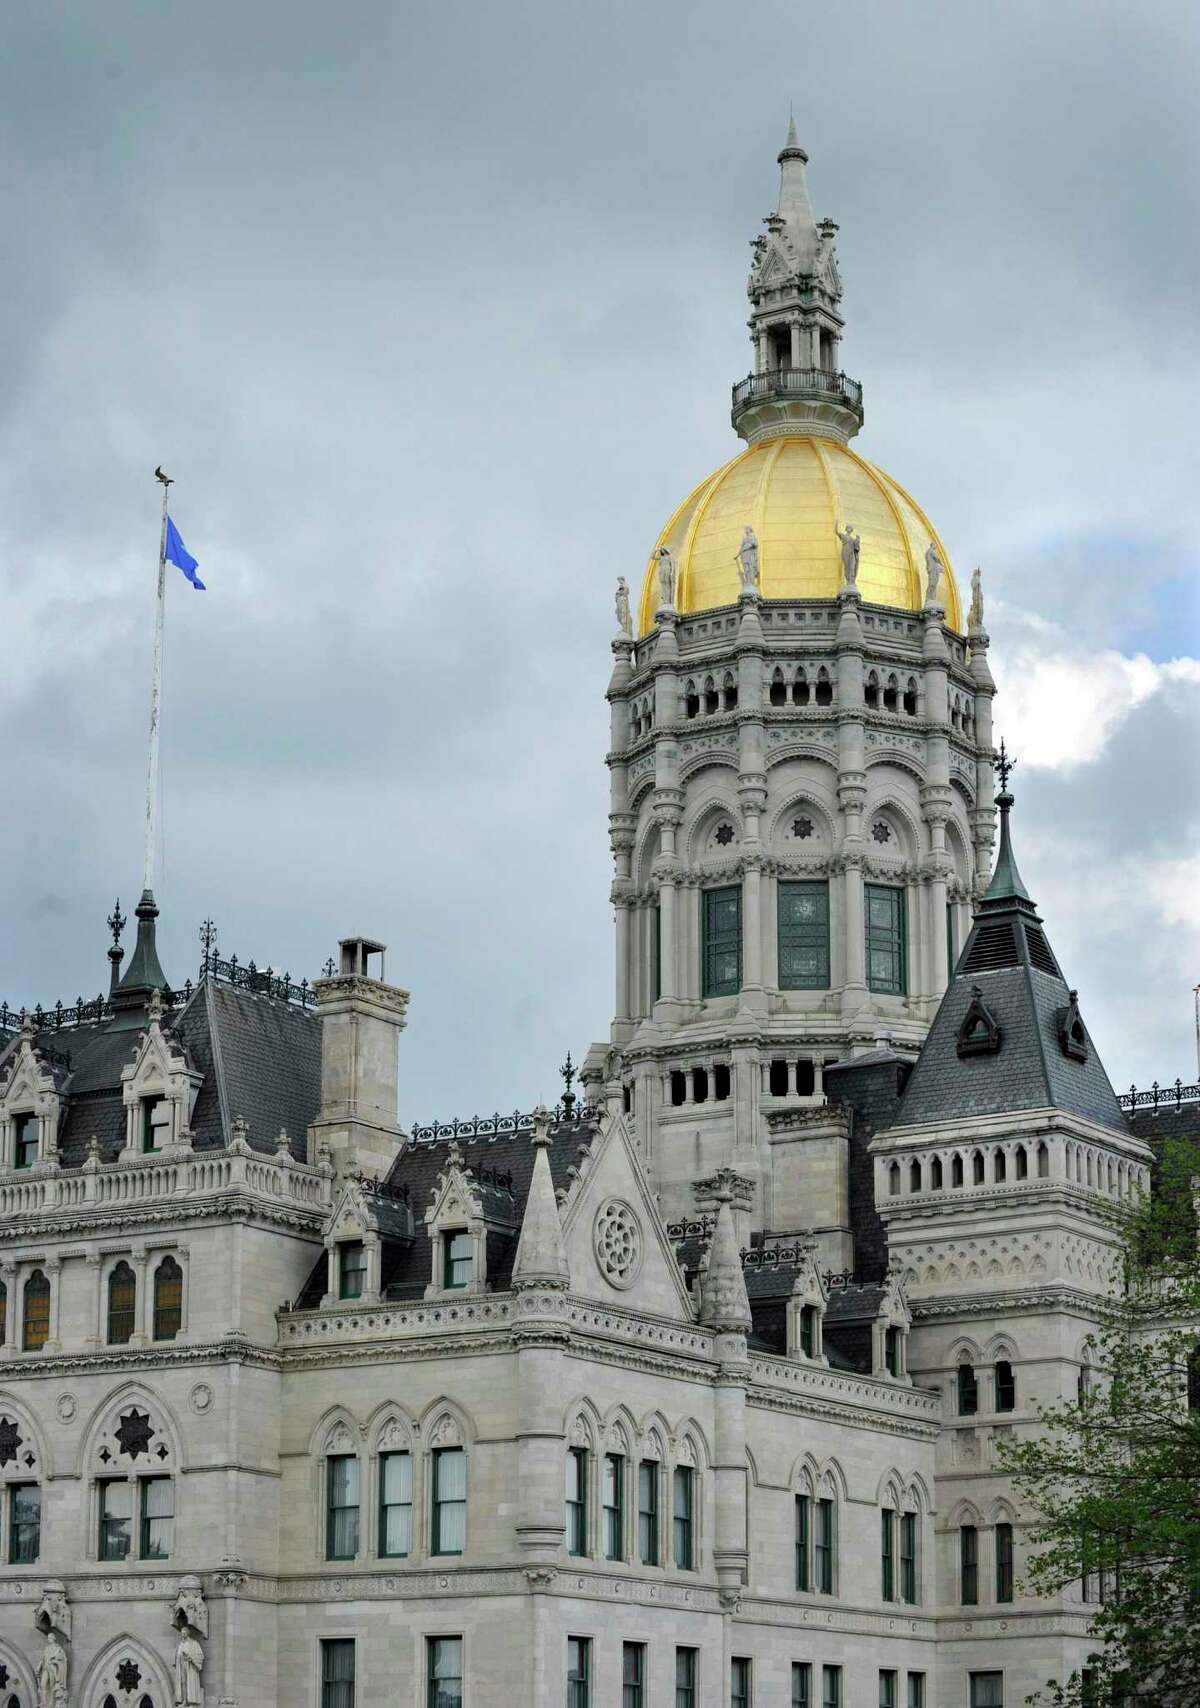 The State Capitol building in Hartford.